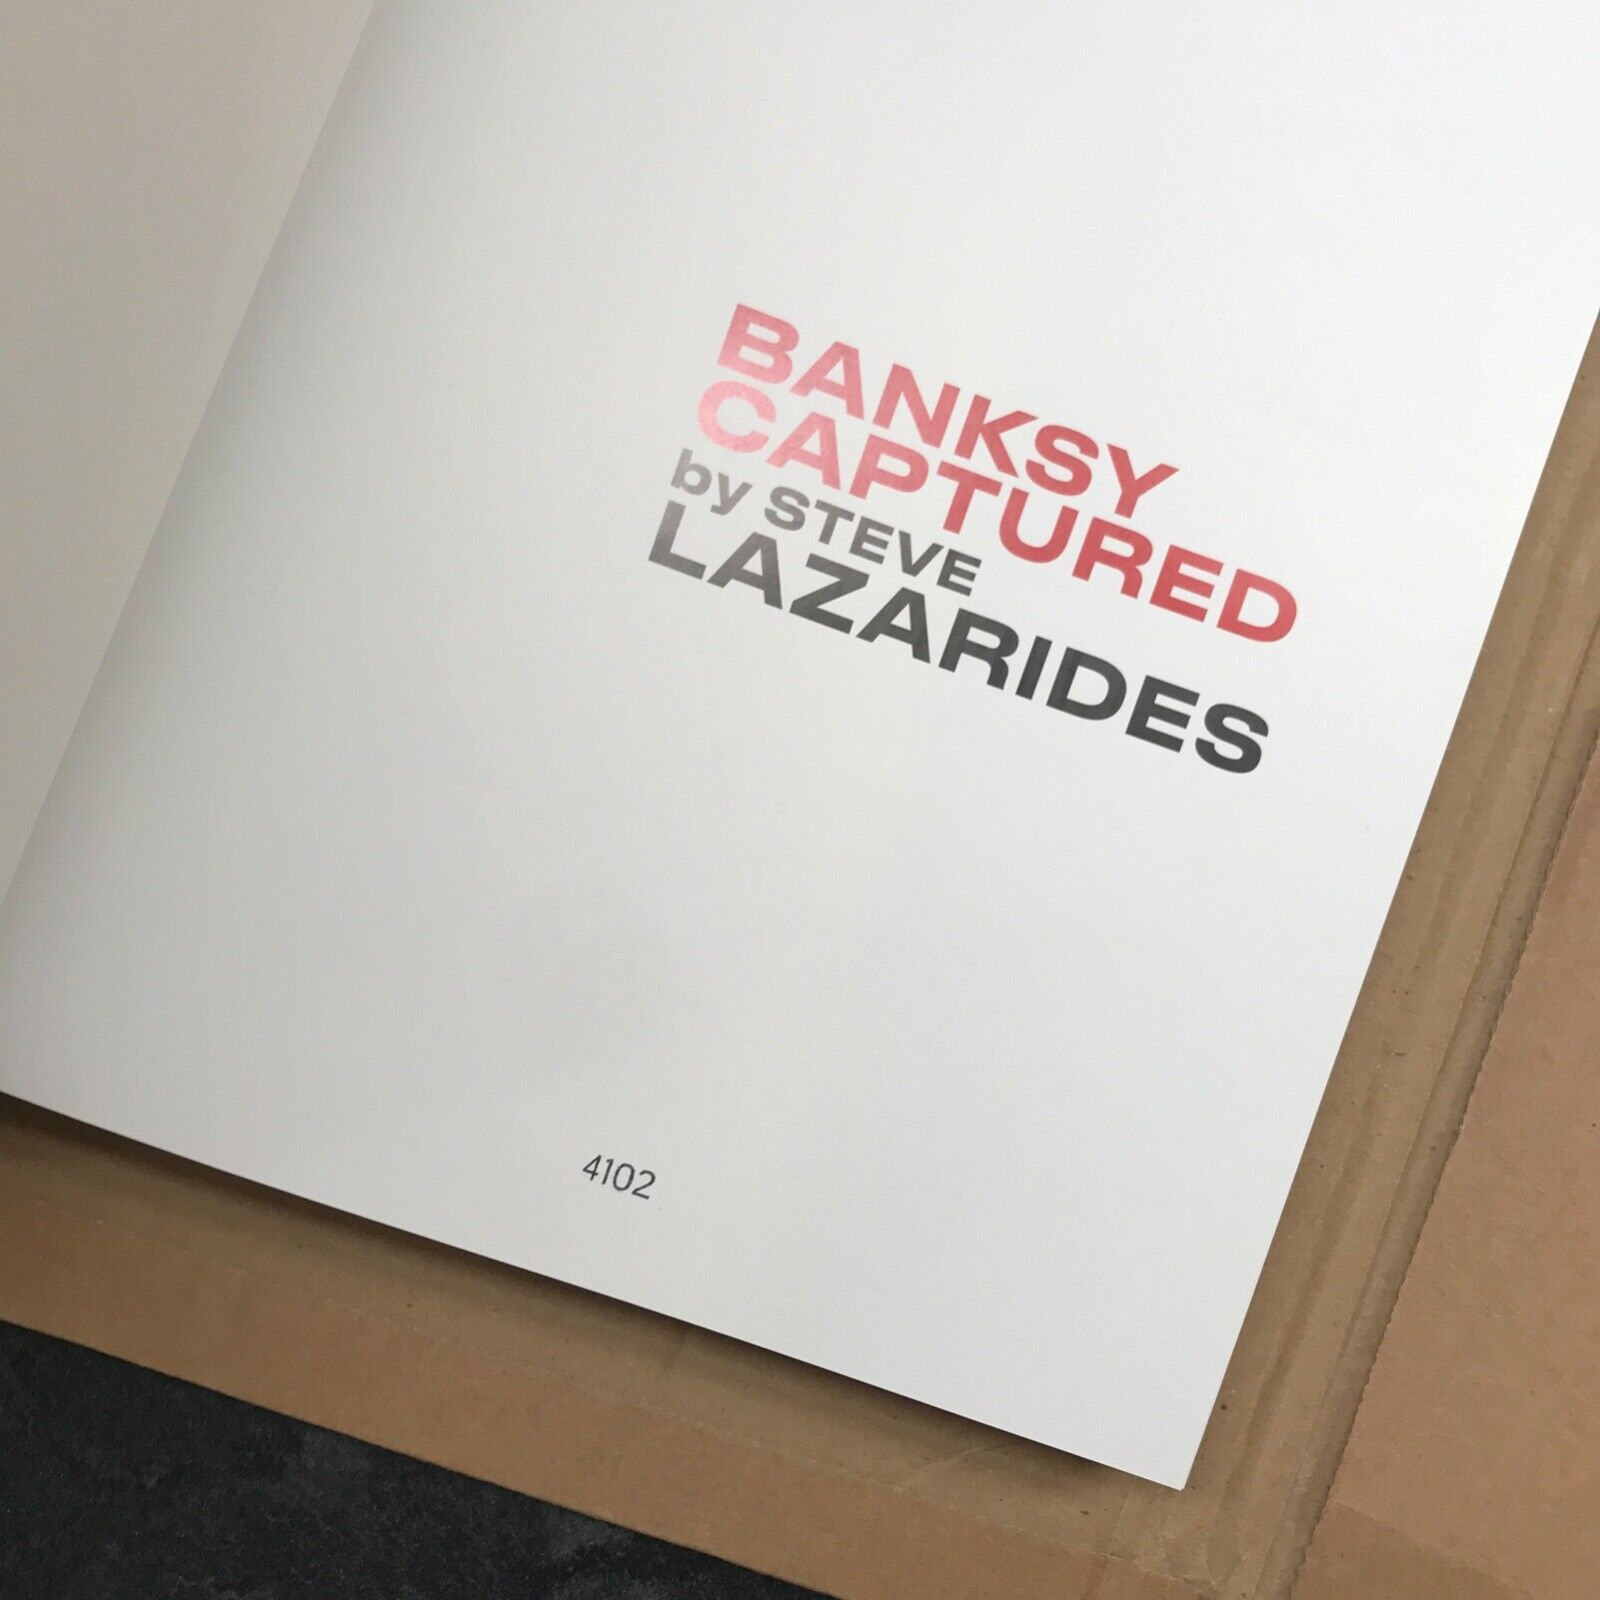 Banksy Captured, Volume 1 by Steve Lazarides, First Edition, Numbered 4102/5000, SOLD OUT - Image 2 of 21